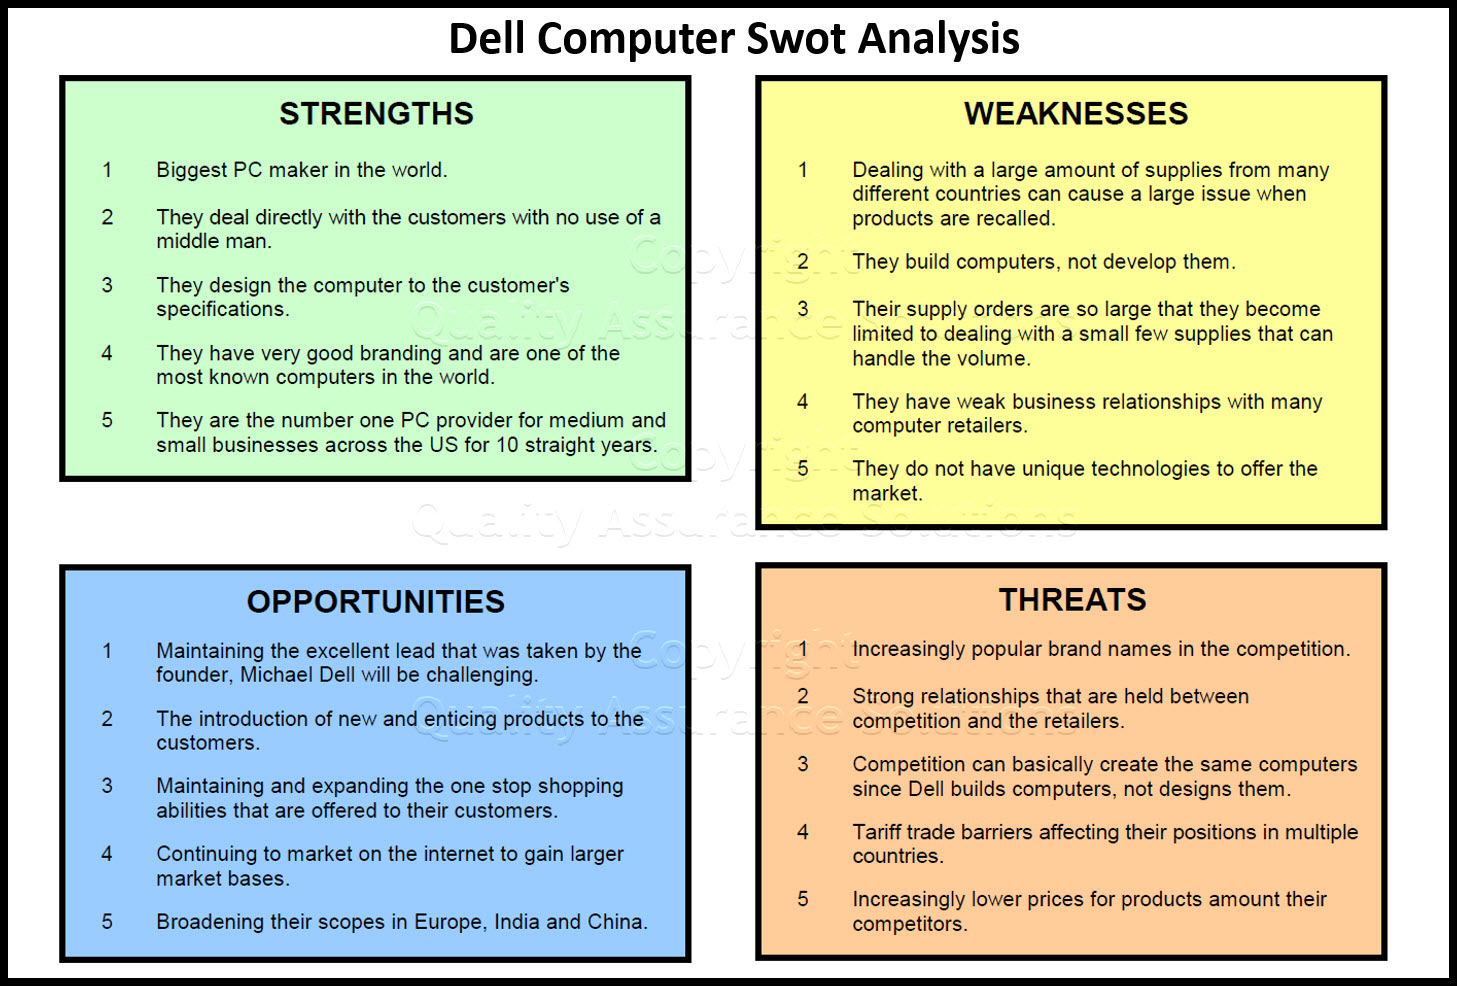 swot analysis example for information technology company